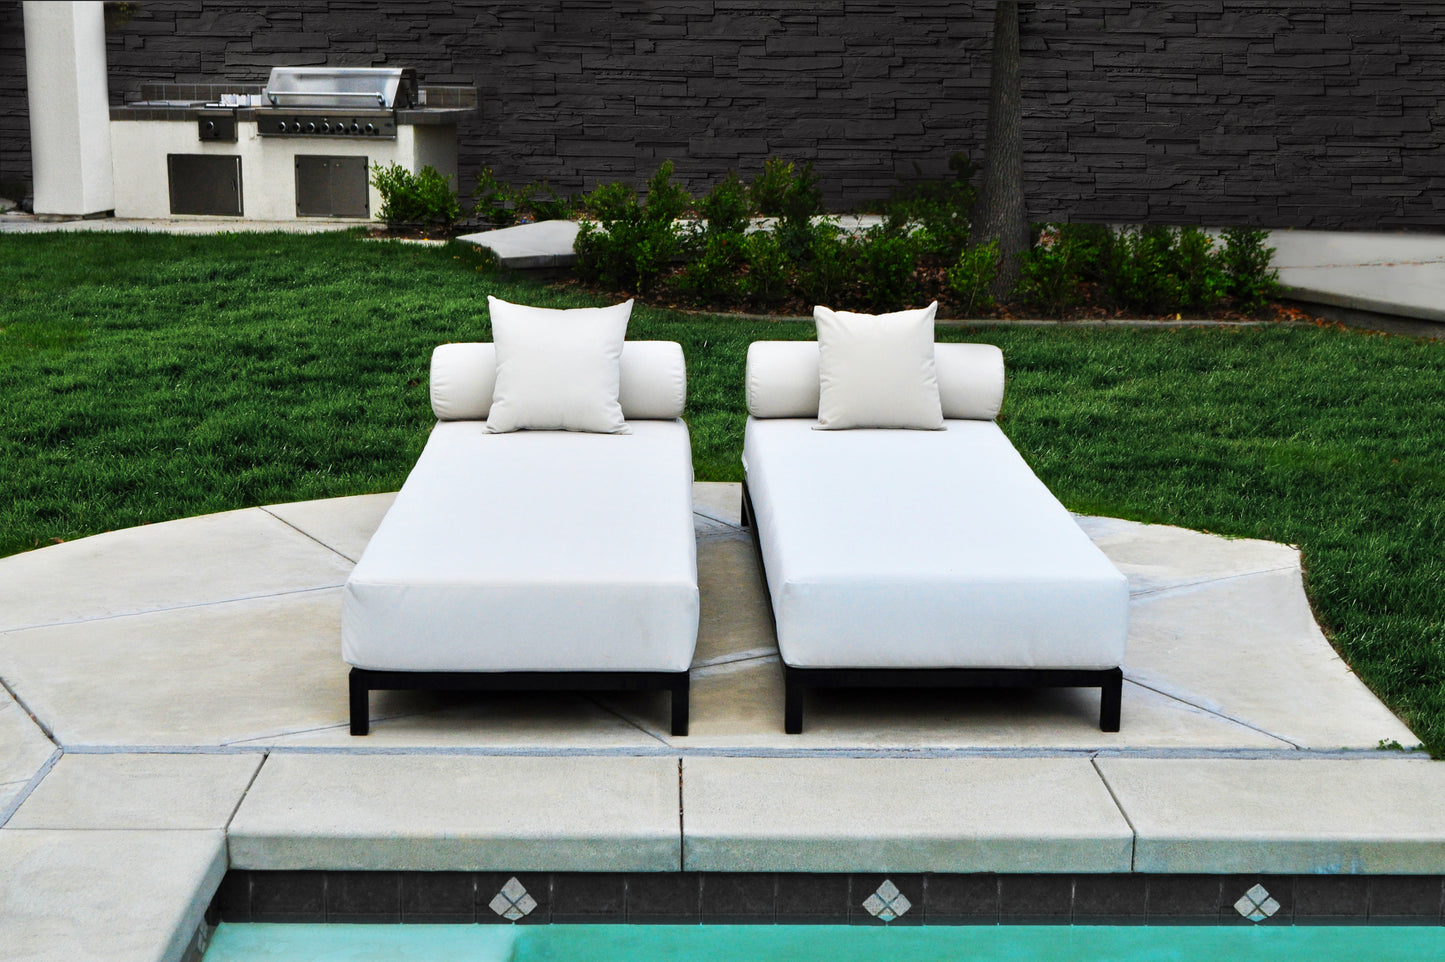 Volantes Outdoor White Chaise Loungers (Set of 3)